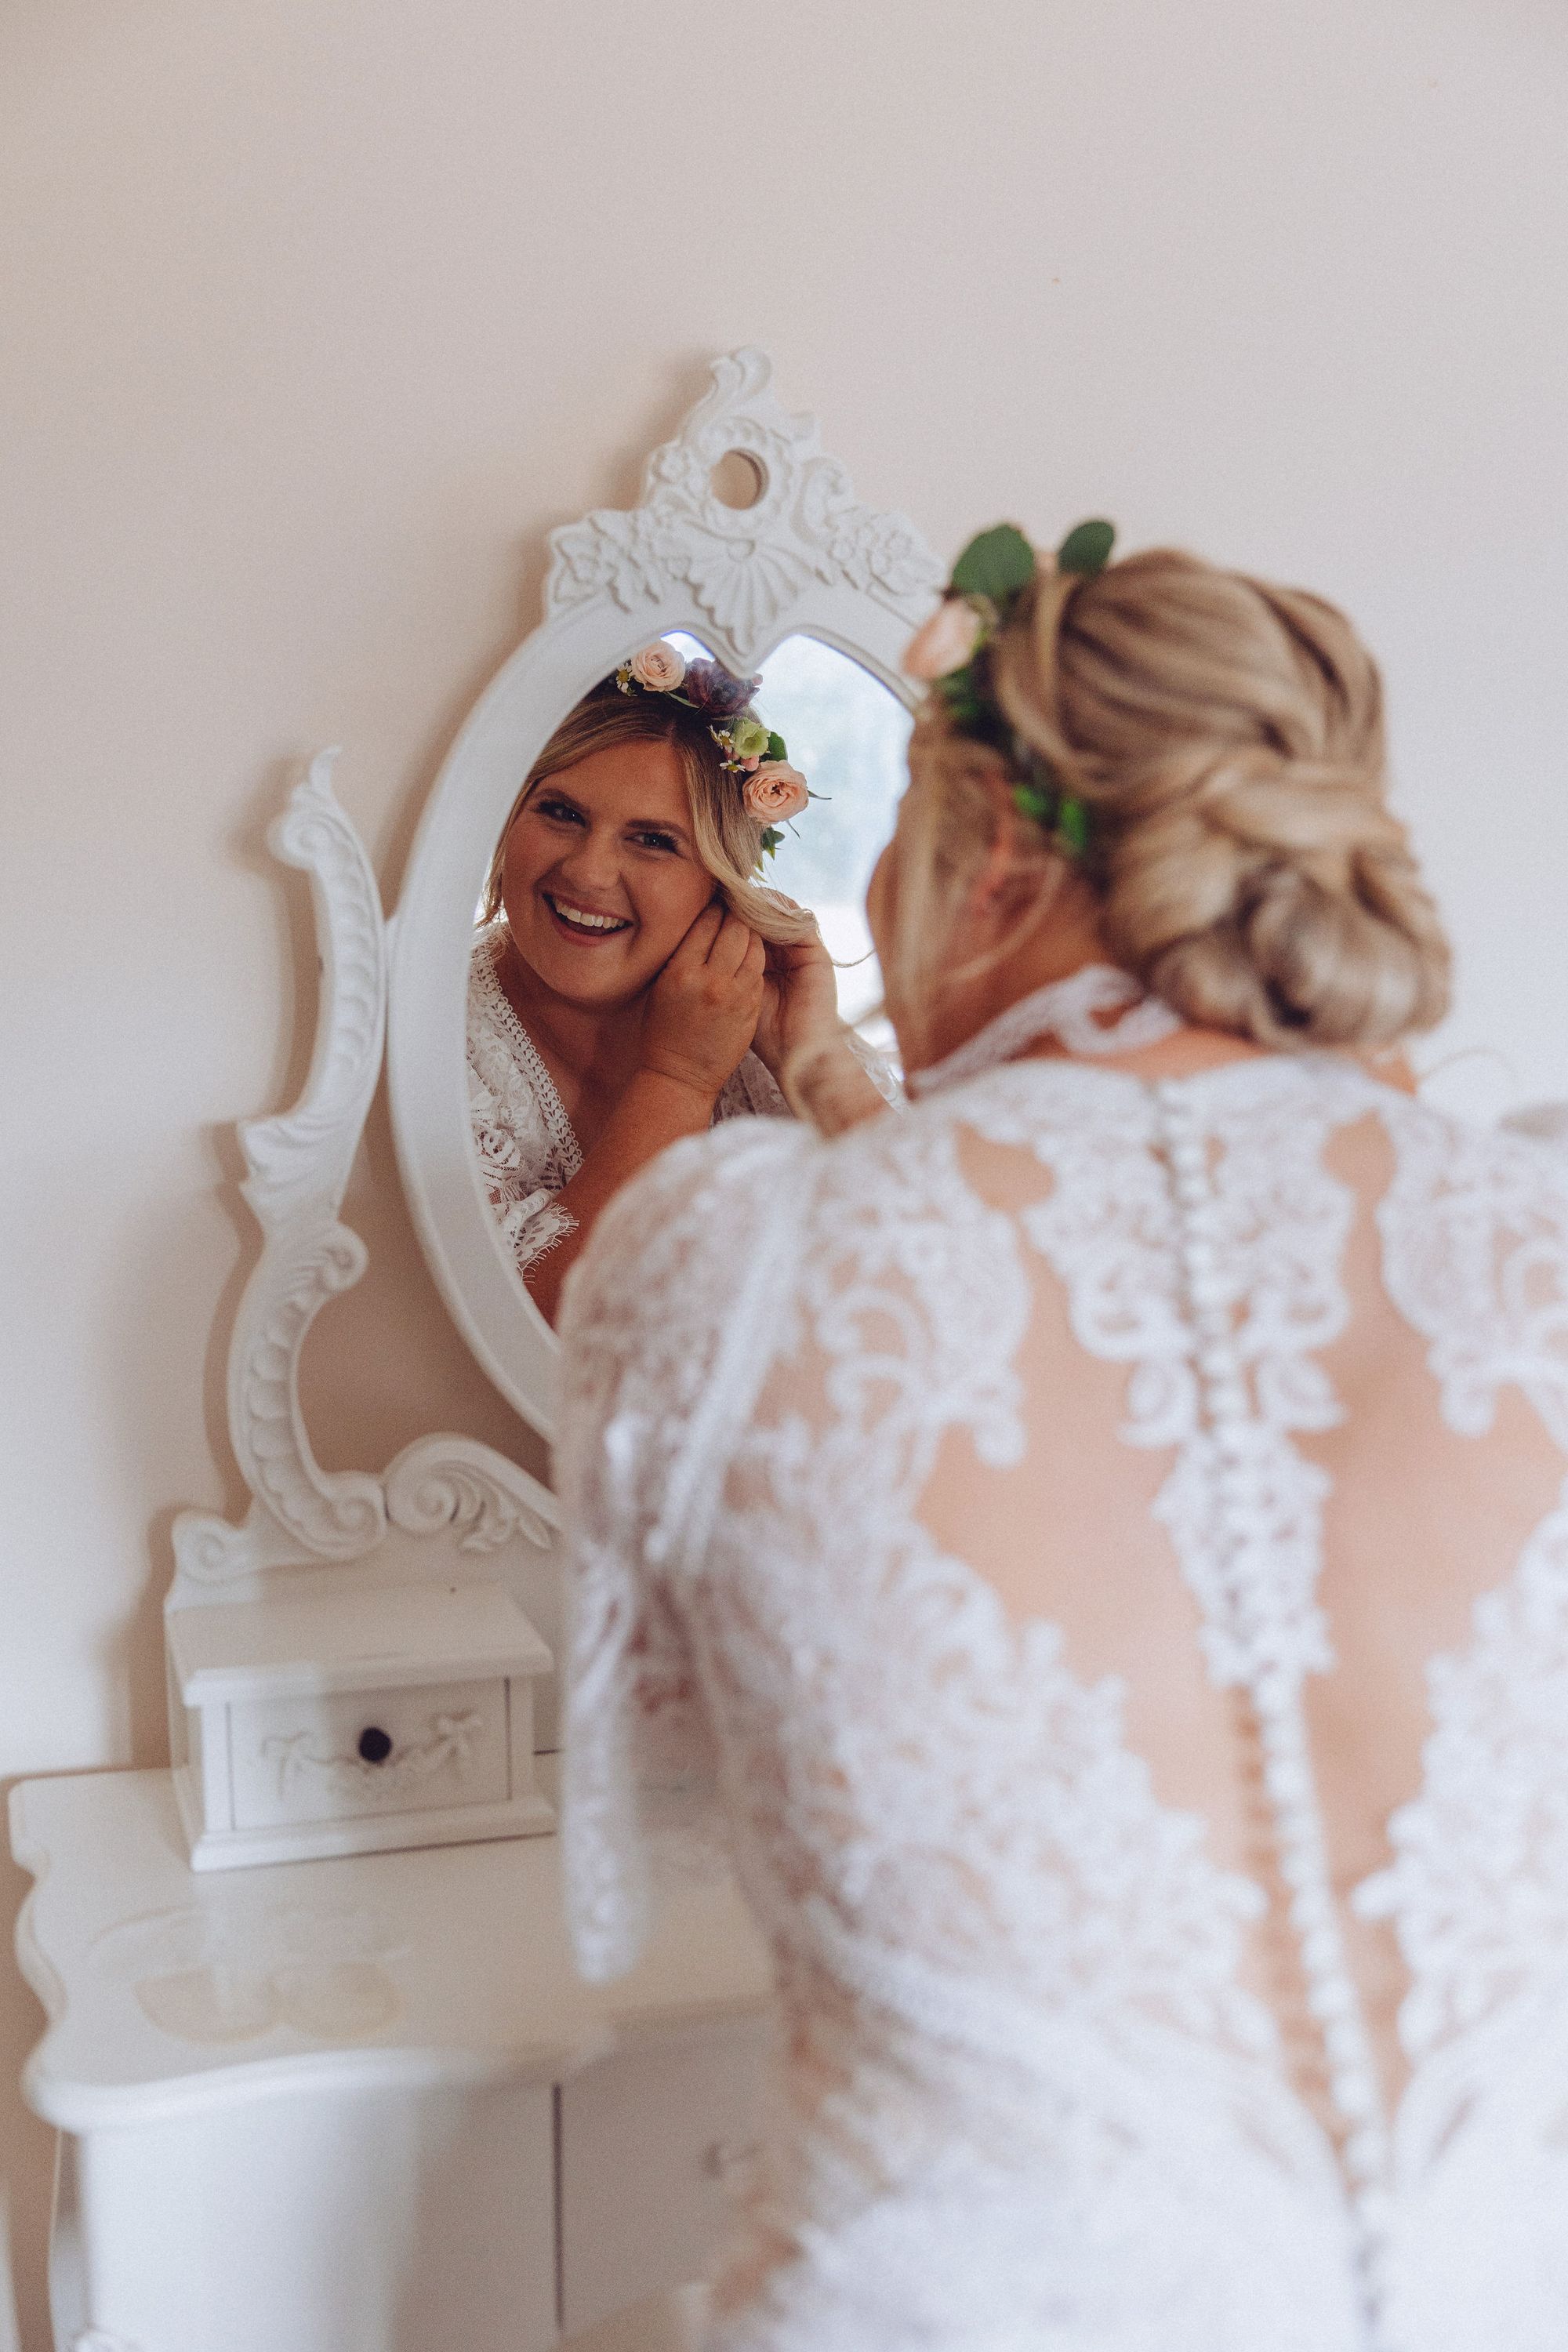 Nor looking into the mirror putting in her wedding day earrings wearing her lace wedding dress. Photo thanks to Fordtography.